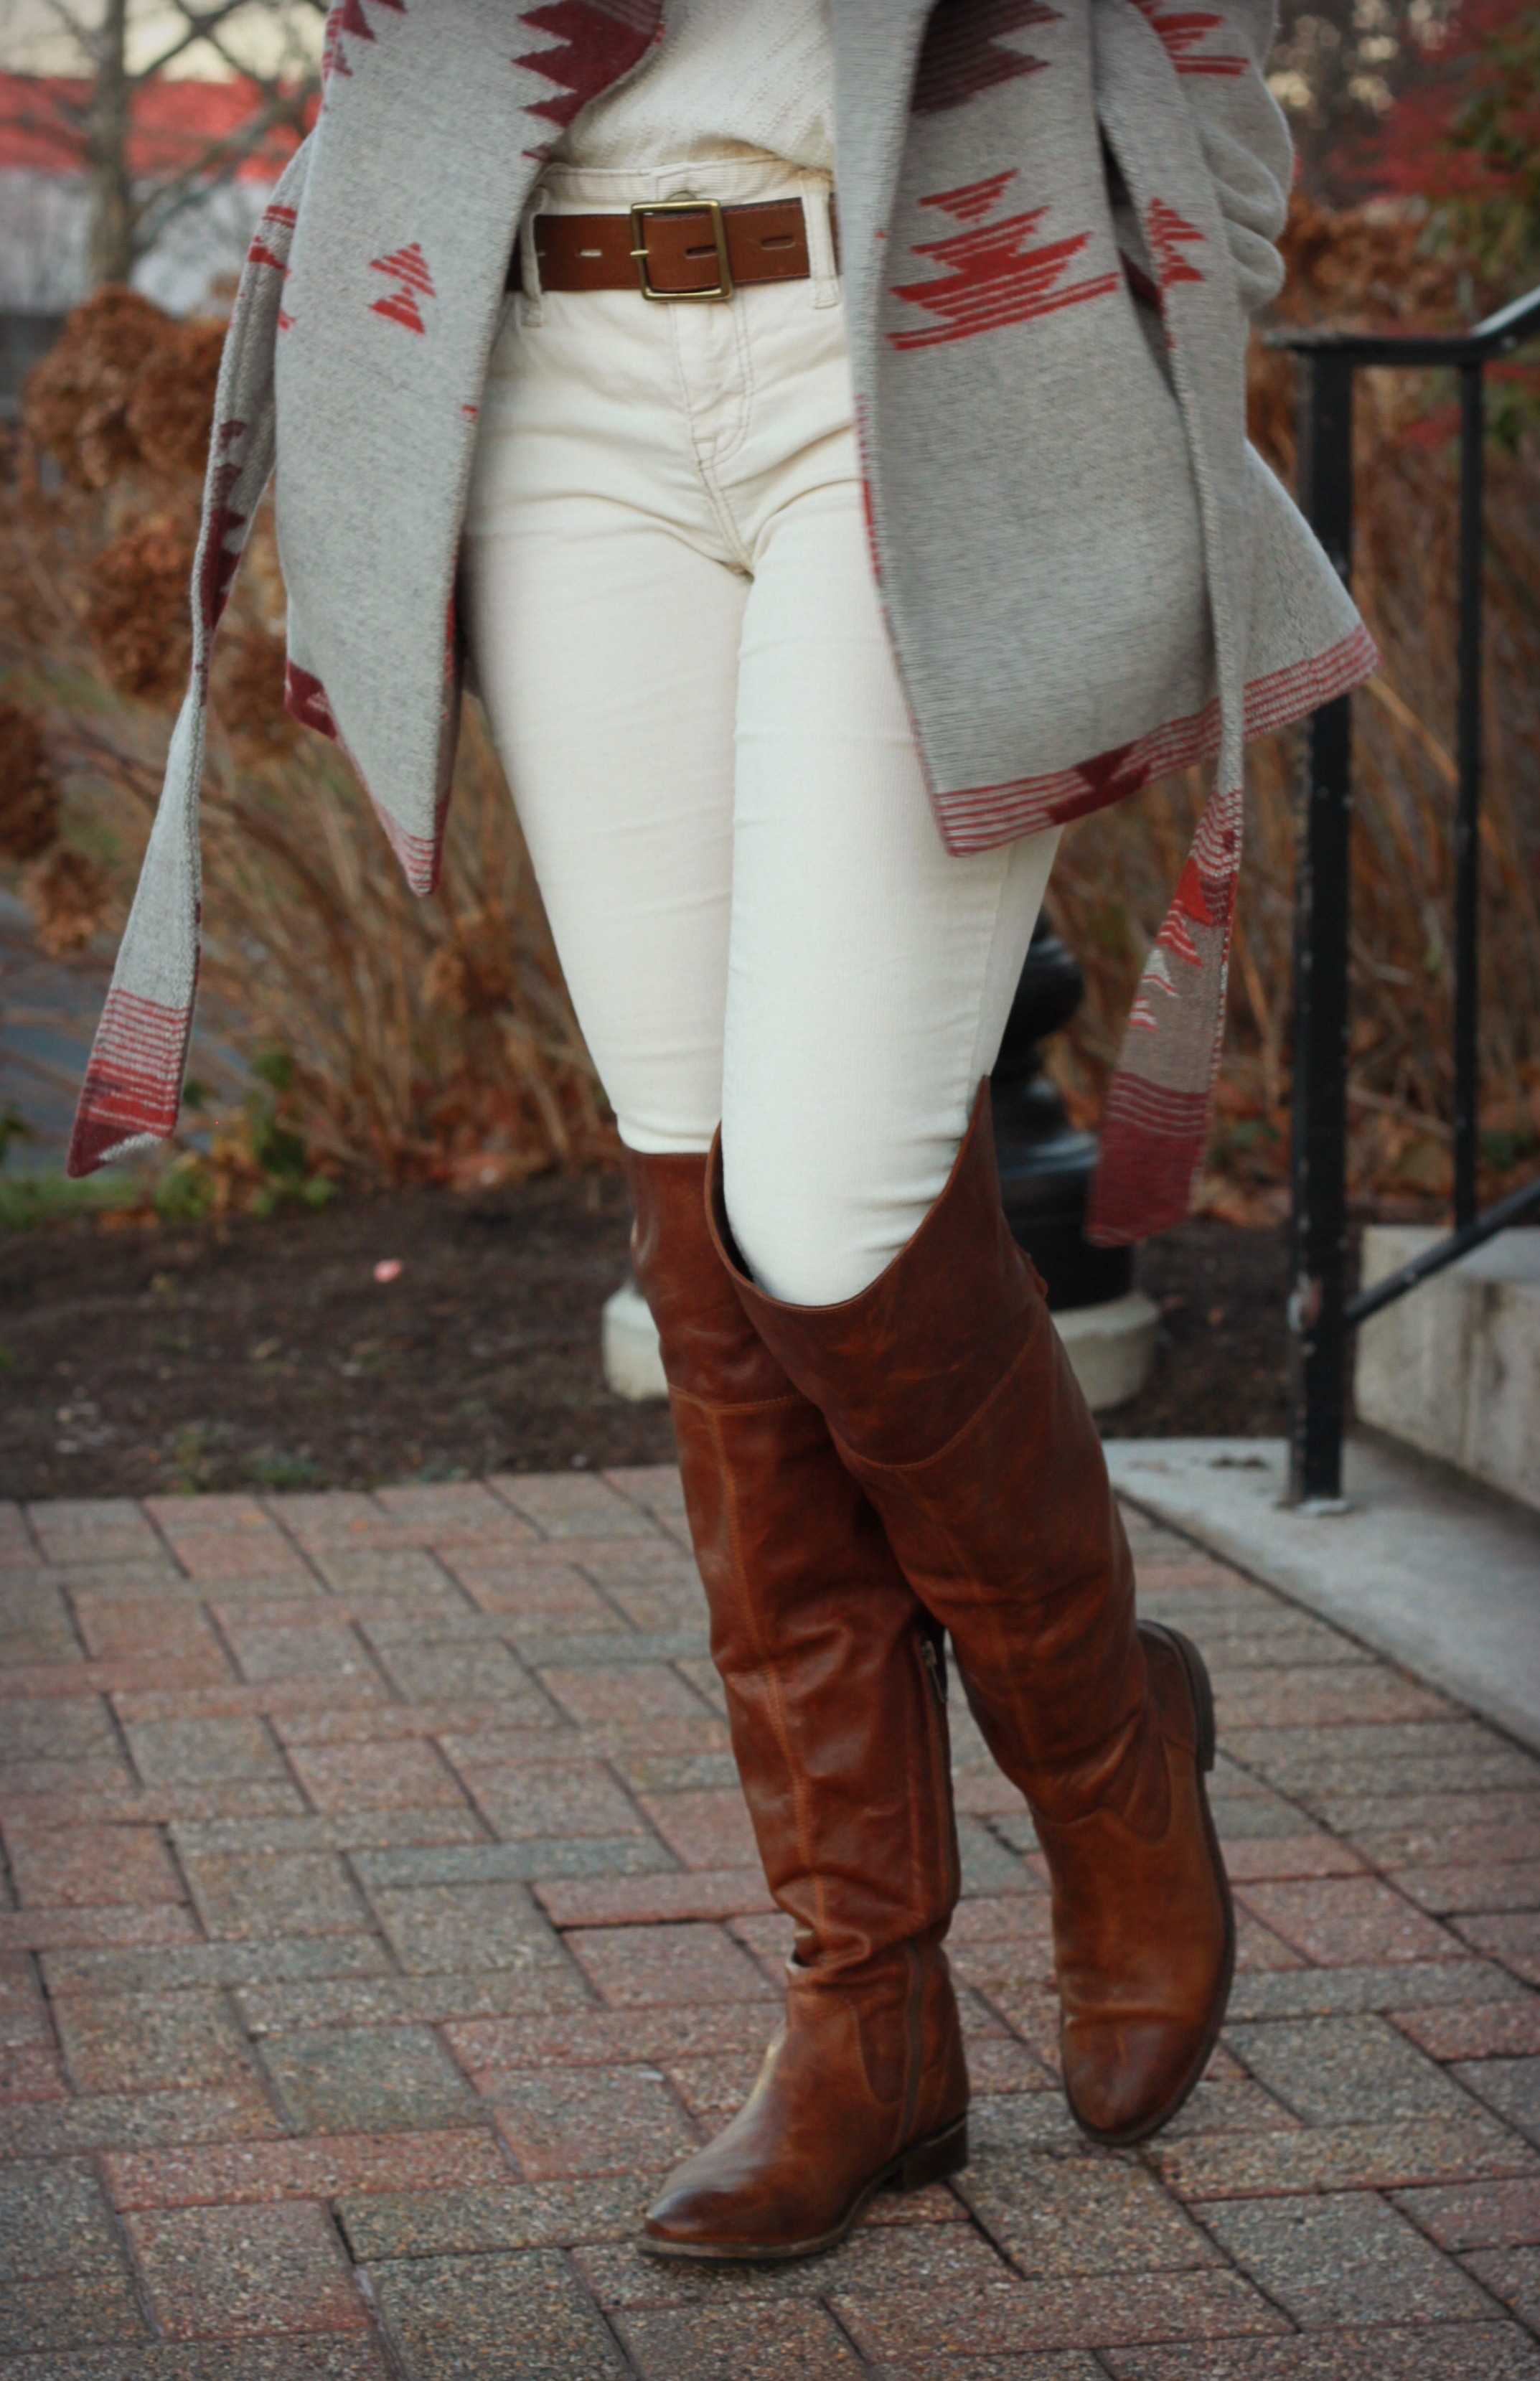 frye melissa over the knee boots